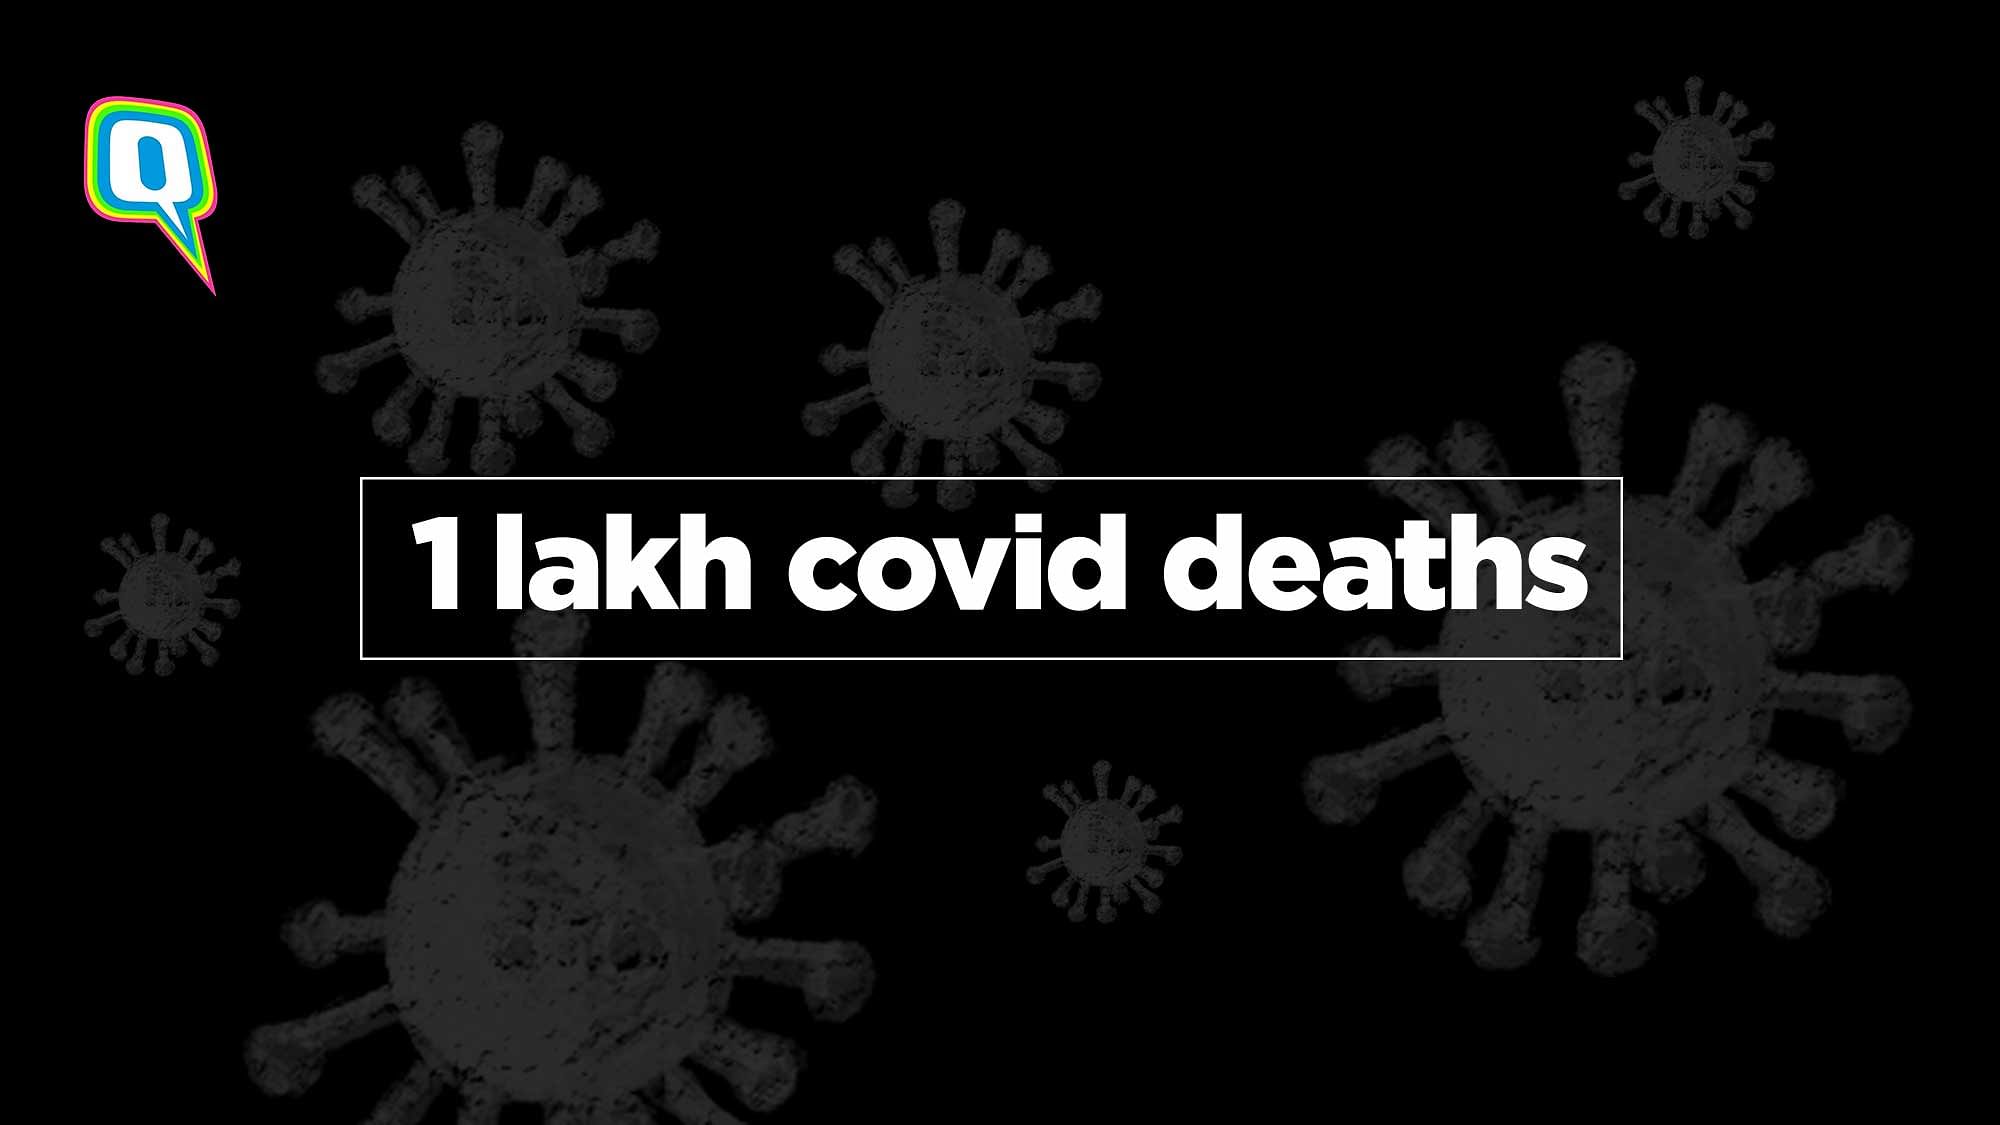  India has reported over 1,000 deaths per day over the past month.&nbsp;